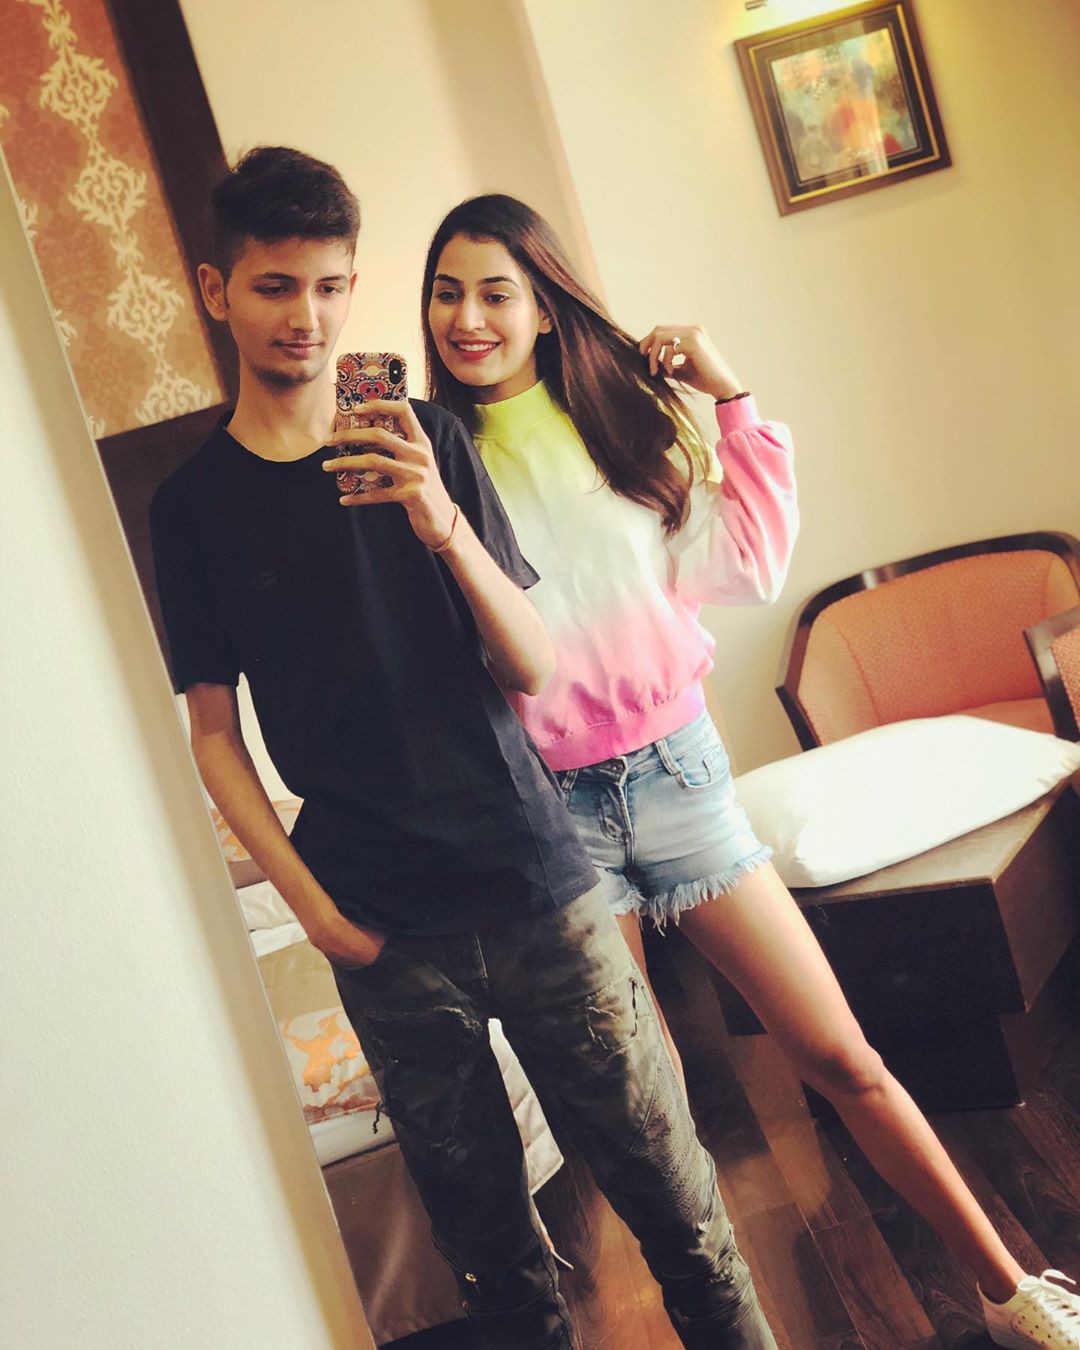 Popular Khushi Choudhary  Pictures, Indian TikTok Star: TikTok Stars,  Popular TikTok Girls,  Indian TikTok Model,  TikTok Pranks,  Cute Khushi Choudhary,  Hottest Khushi Choudhary,  Khushi Choudhary Instagram,  Instagram Khushi Choudhary,  TikTok Girl Khushi Choudhary,  Khushi Choudhary,  Khushi Choudhary Sexy Pictures  